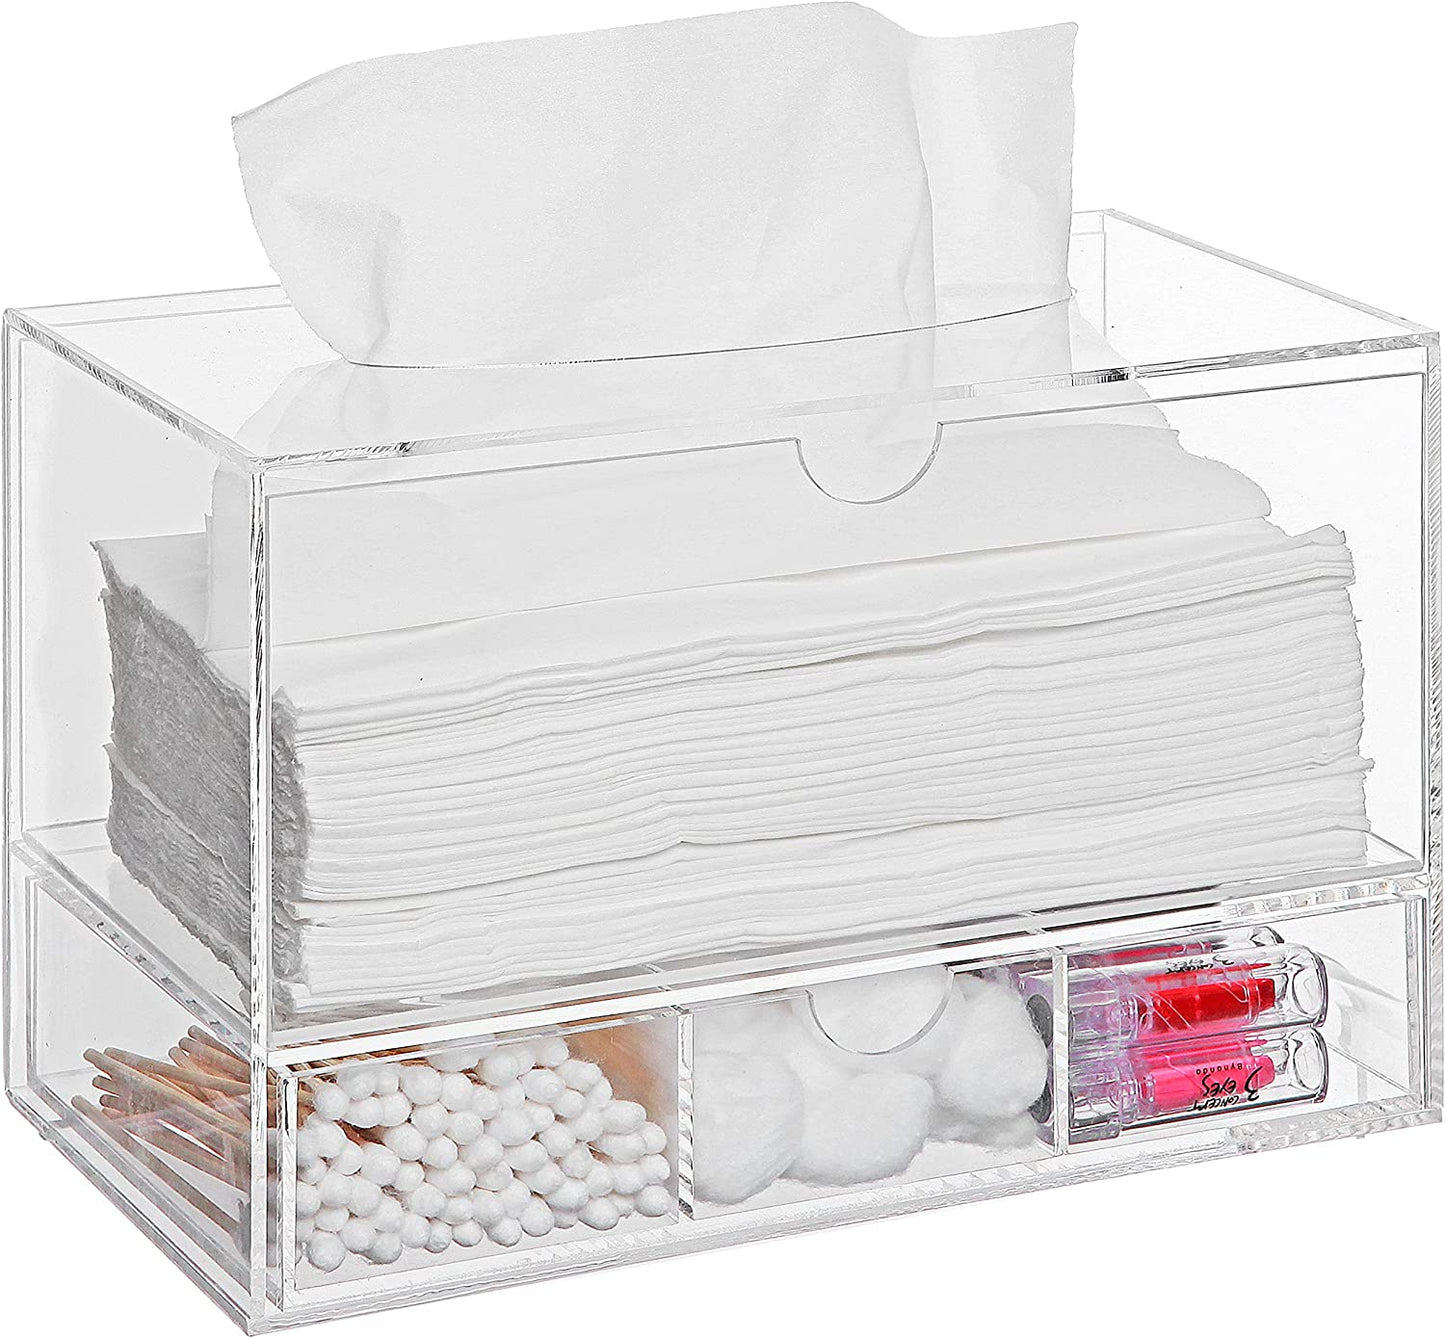 Acrylic Cosmetic Organiser with Tissue Dispenser